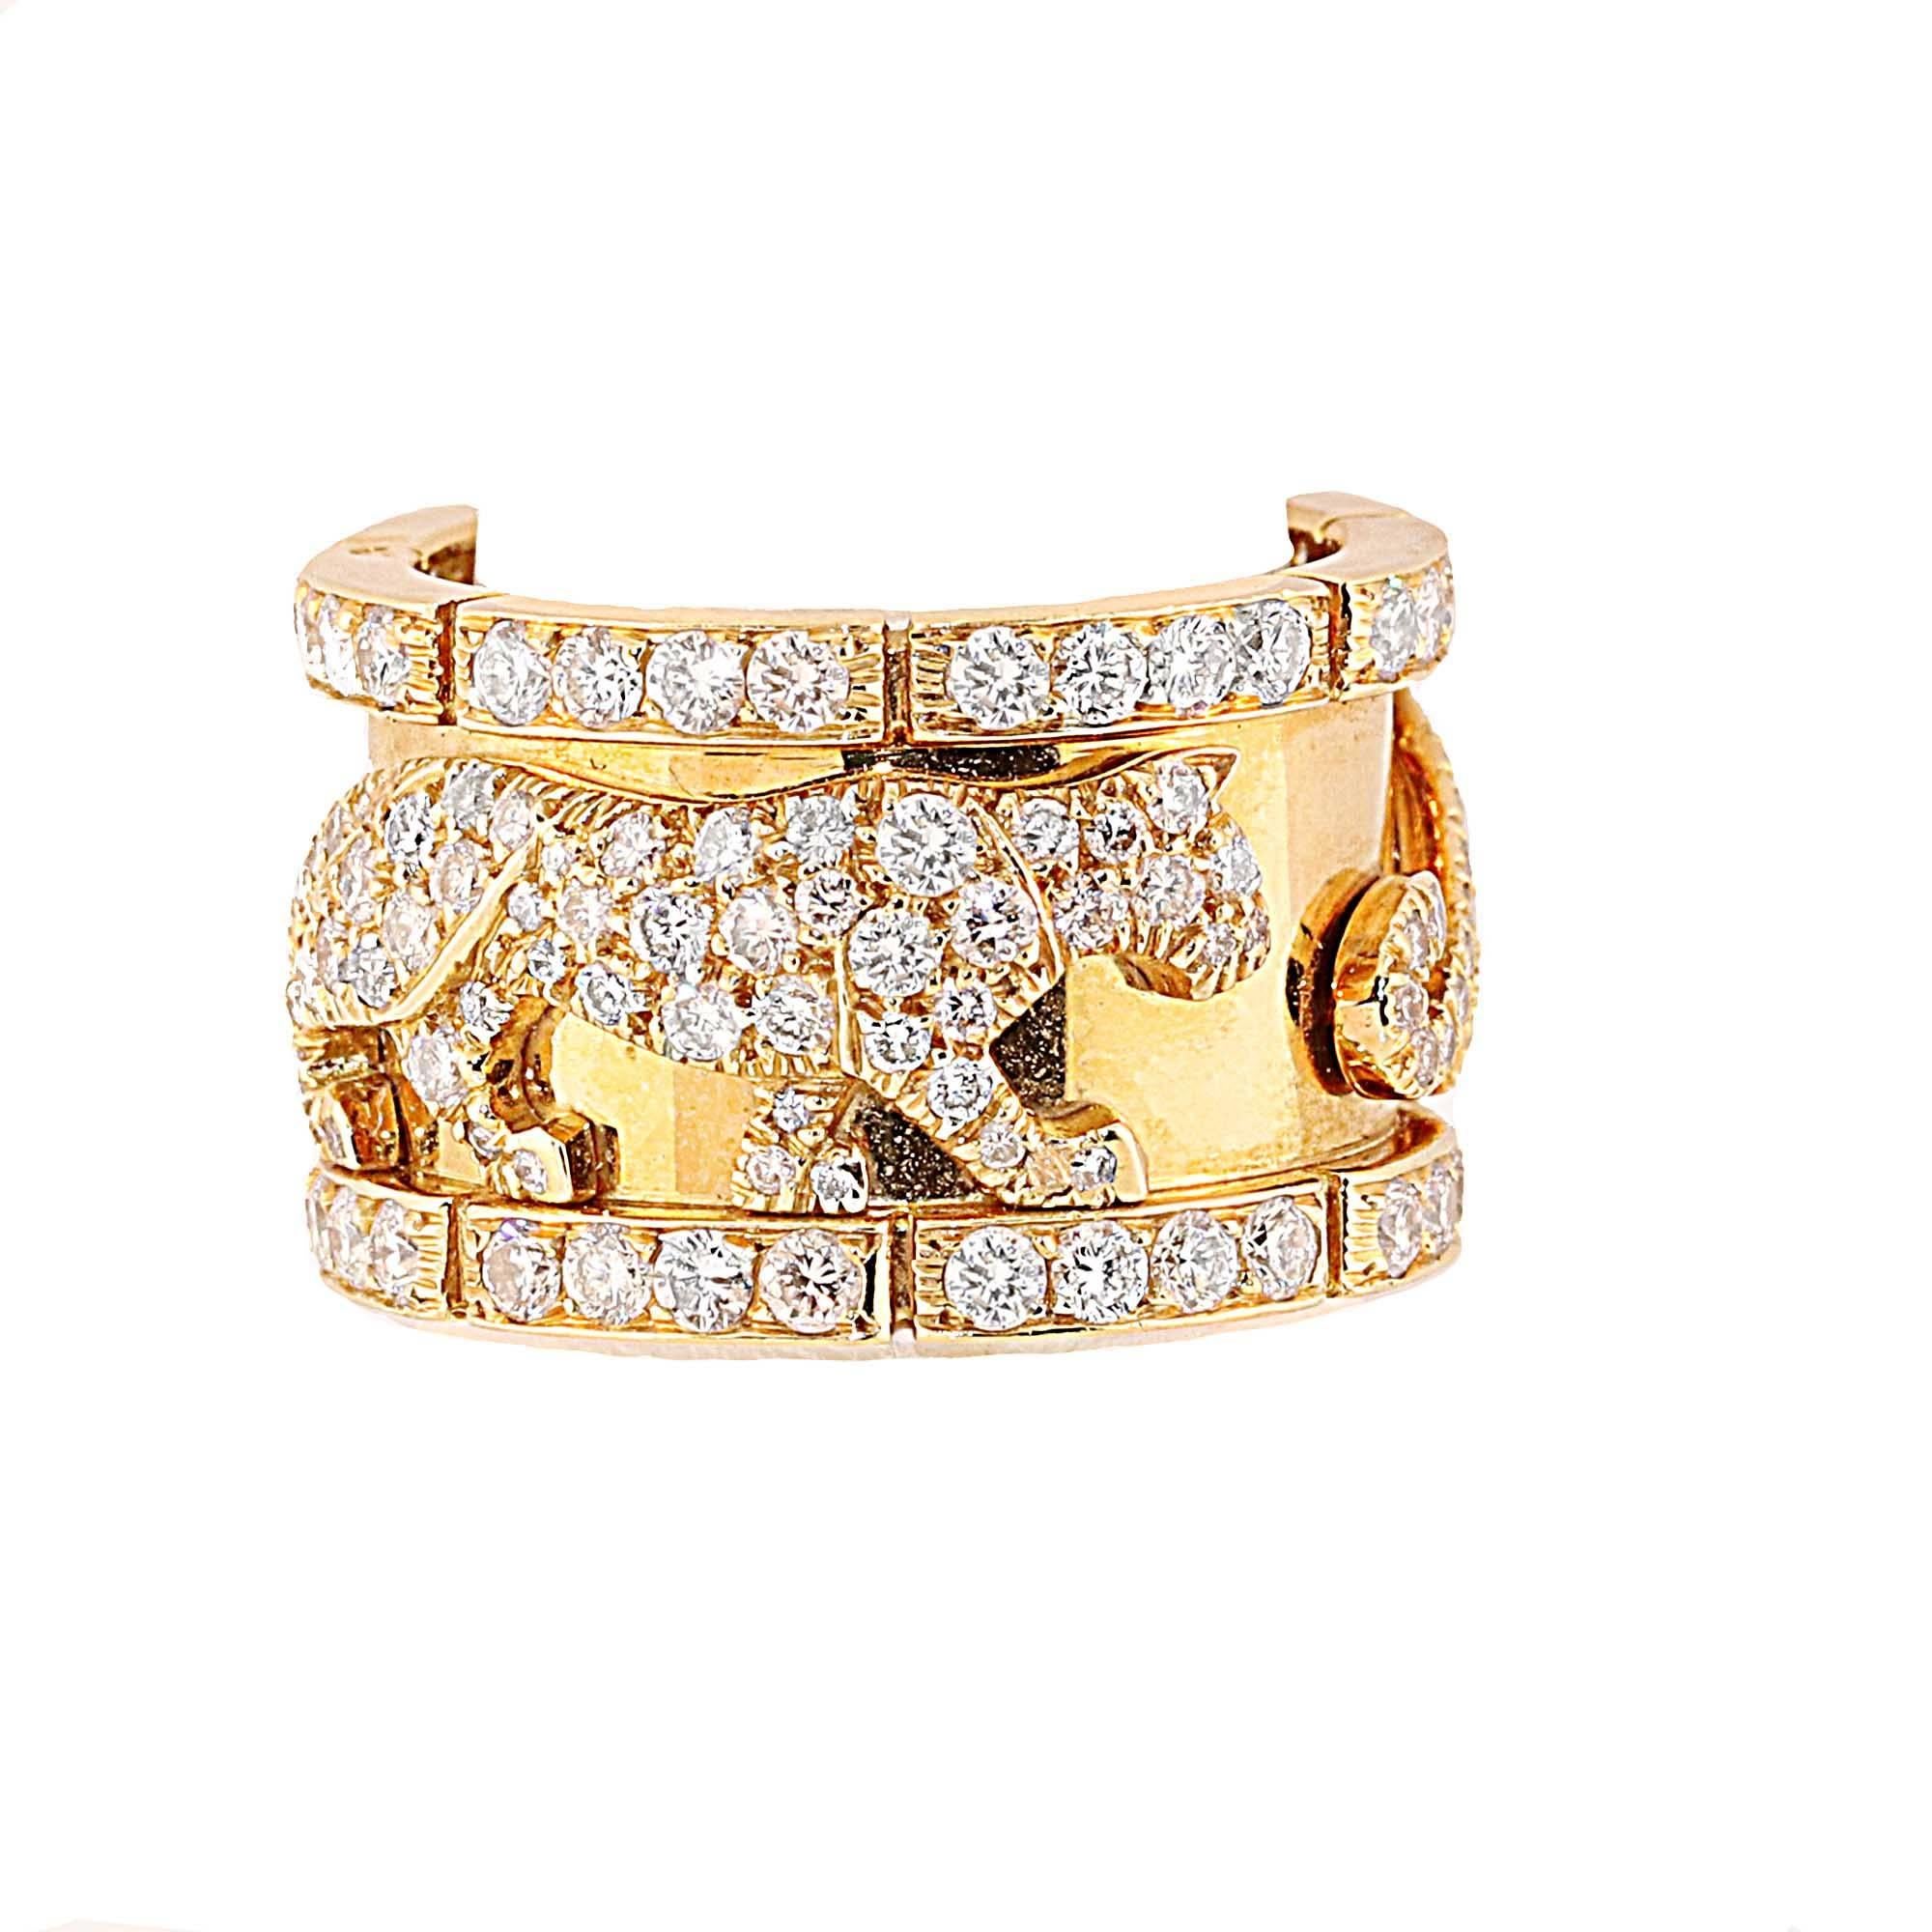 This ring is a true symbol of Cartier and the 